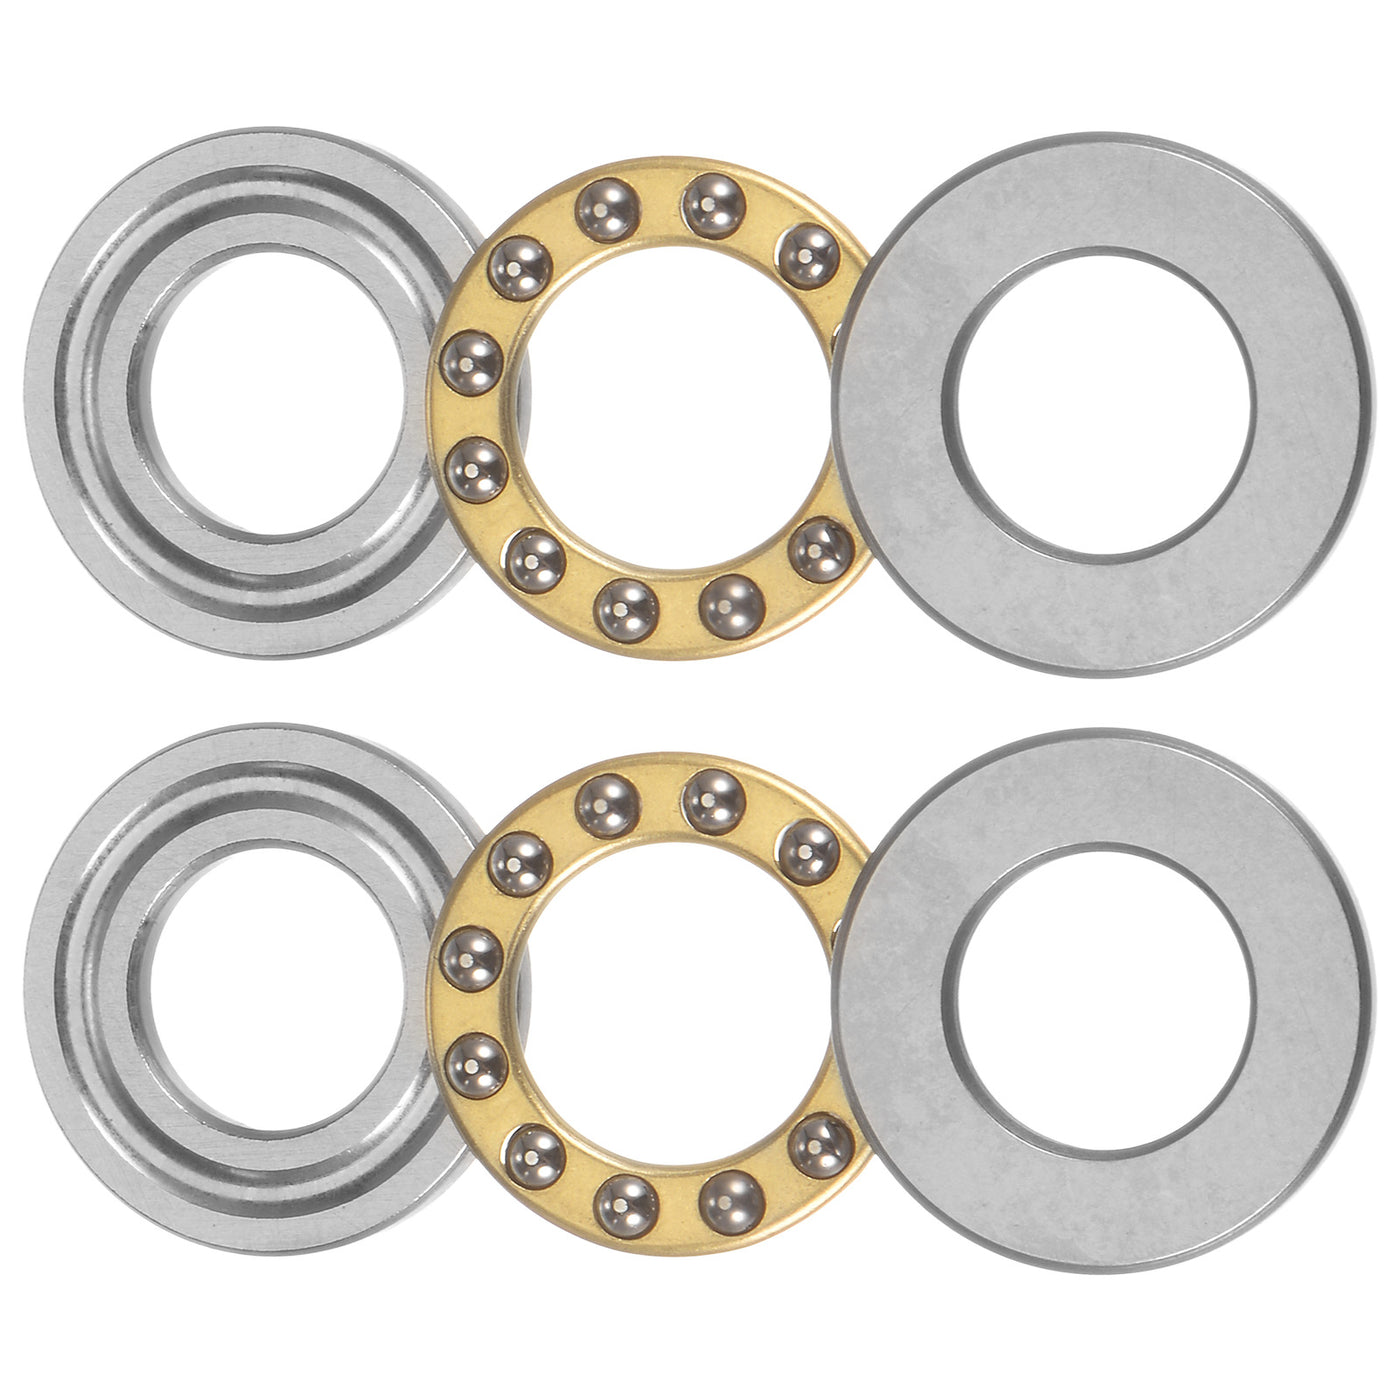 uxcell Uxcell F12-23M Thrust Ball Bearing 12x23x7.5mm Brass with Washers ABEC3 2pcs